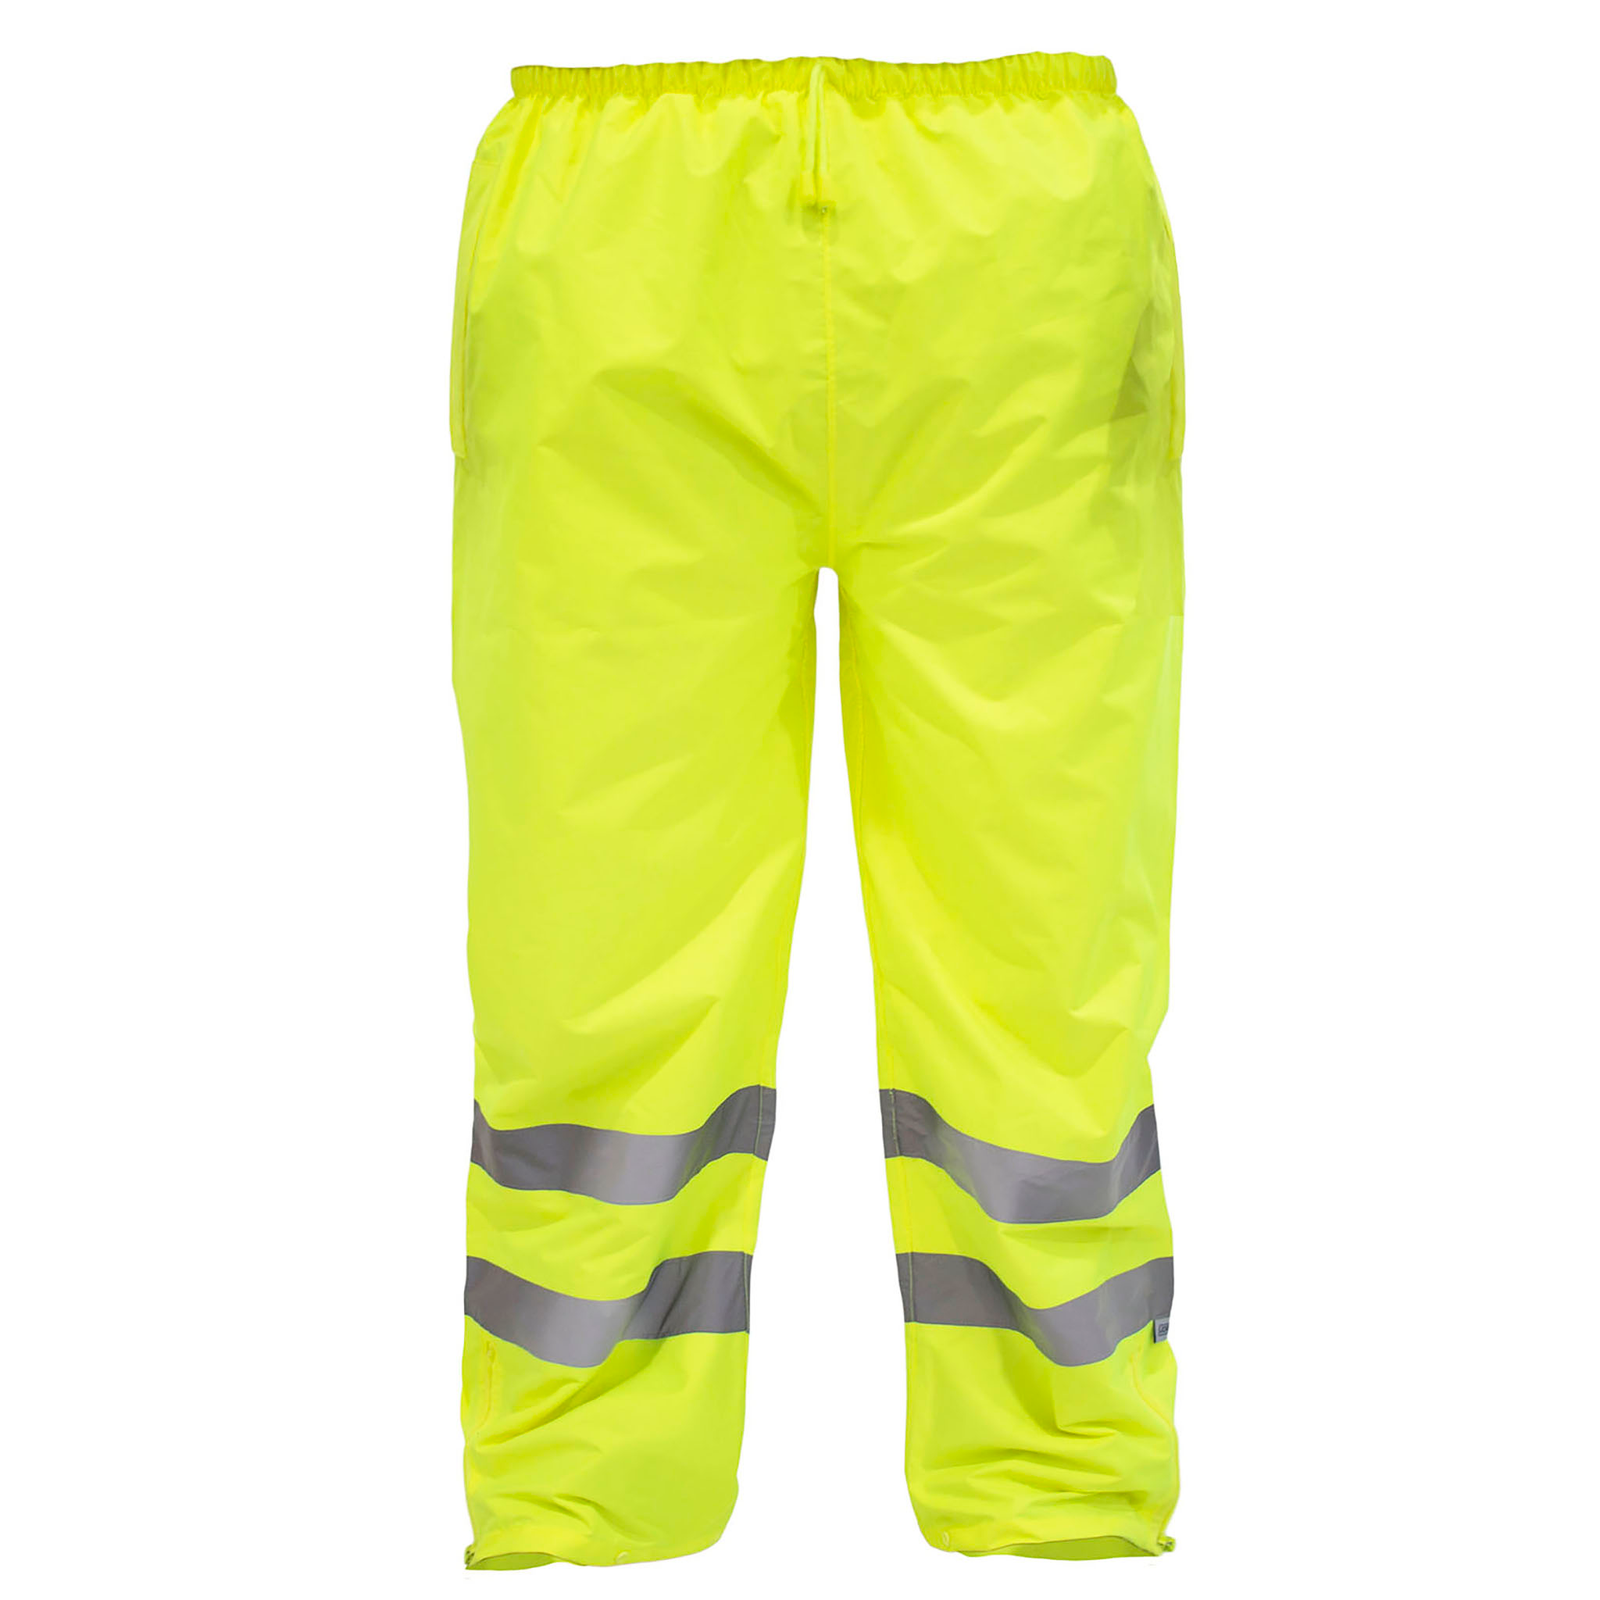 Front of the High visibility all yellow/lime JORESTECH rain pant with reflective strips